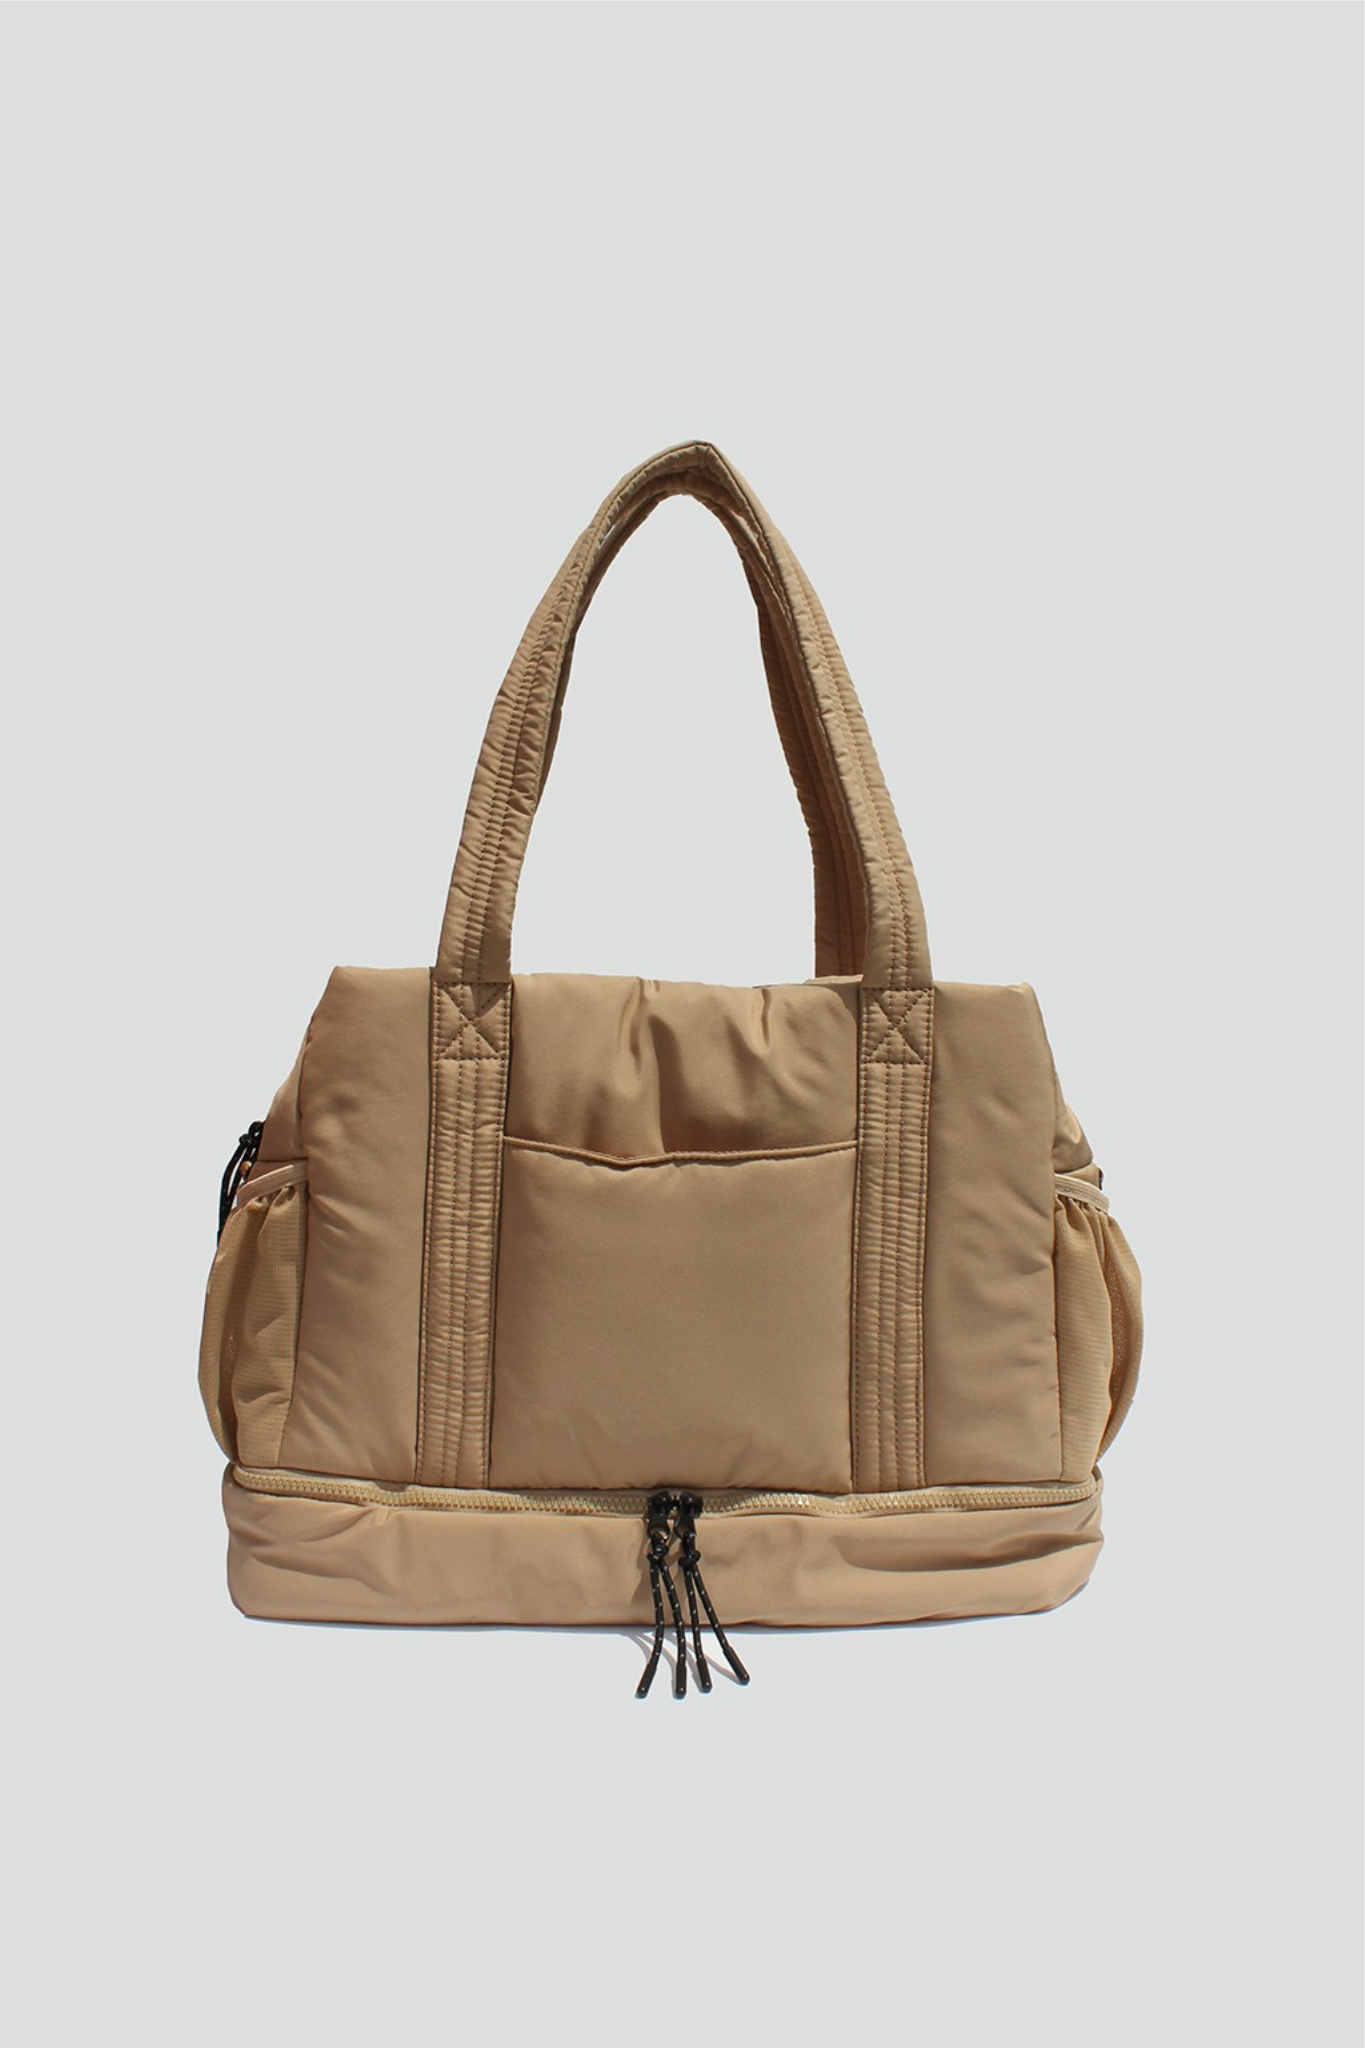 View 1 of Brooke Puffy Overnight Bag in Sand, a Bags from Larrea Cove. Detail: Introducing Brooke – the perfect companion for weekend getaways a...